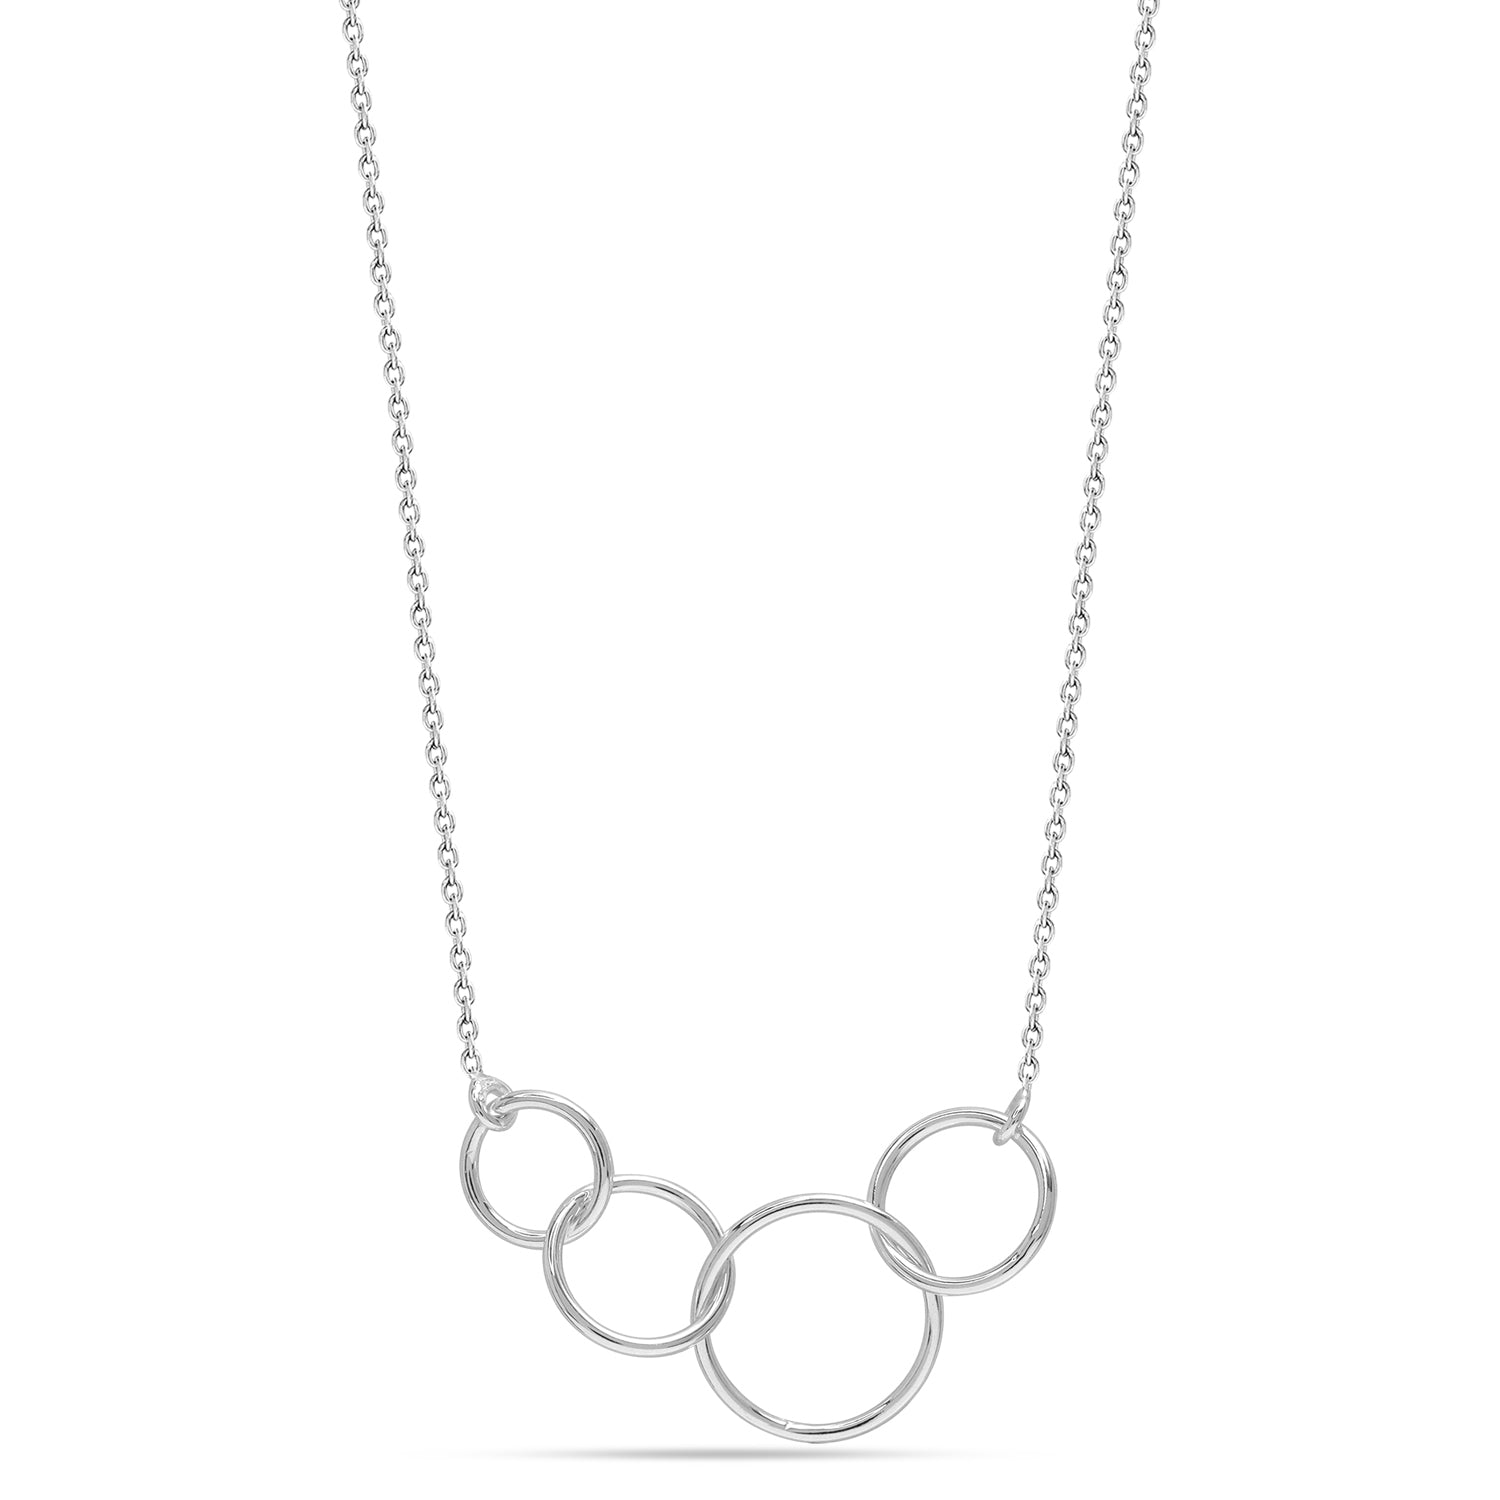 925 Sterling Silver Interlocking Infinity Four Circles Rings Necklace for Women Teen